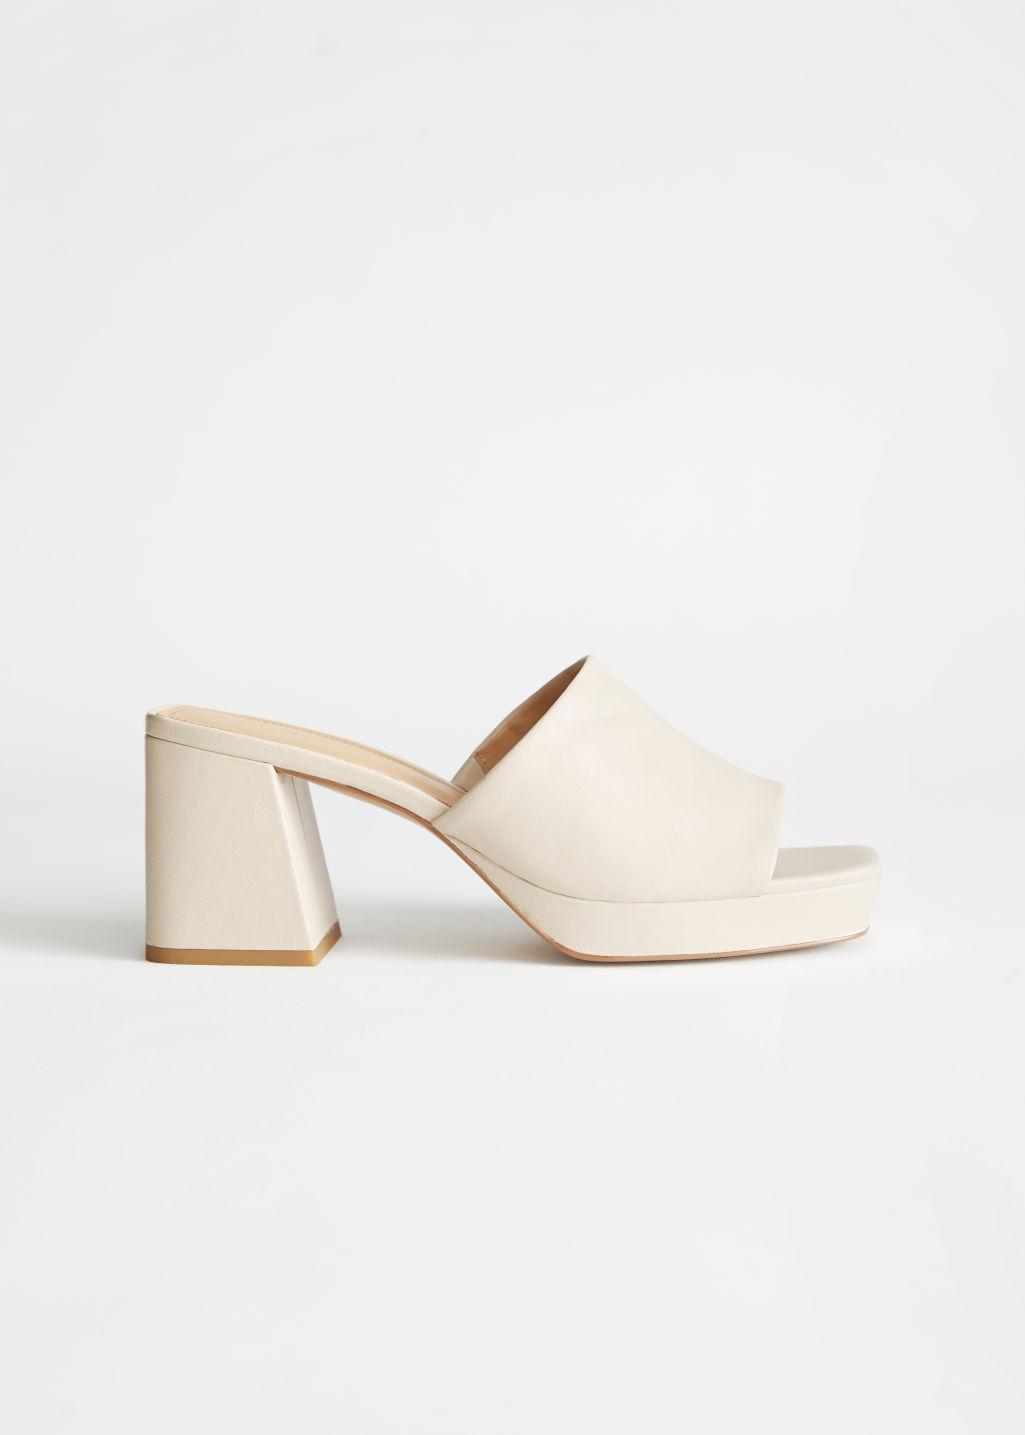 & Other Stories Leather Heeled Platform Mules in White | Lyst